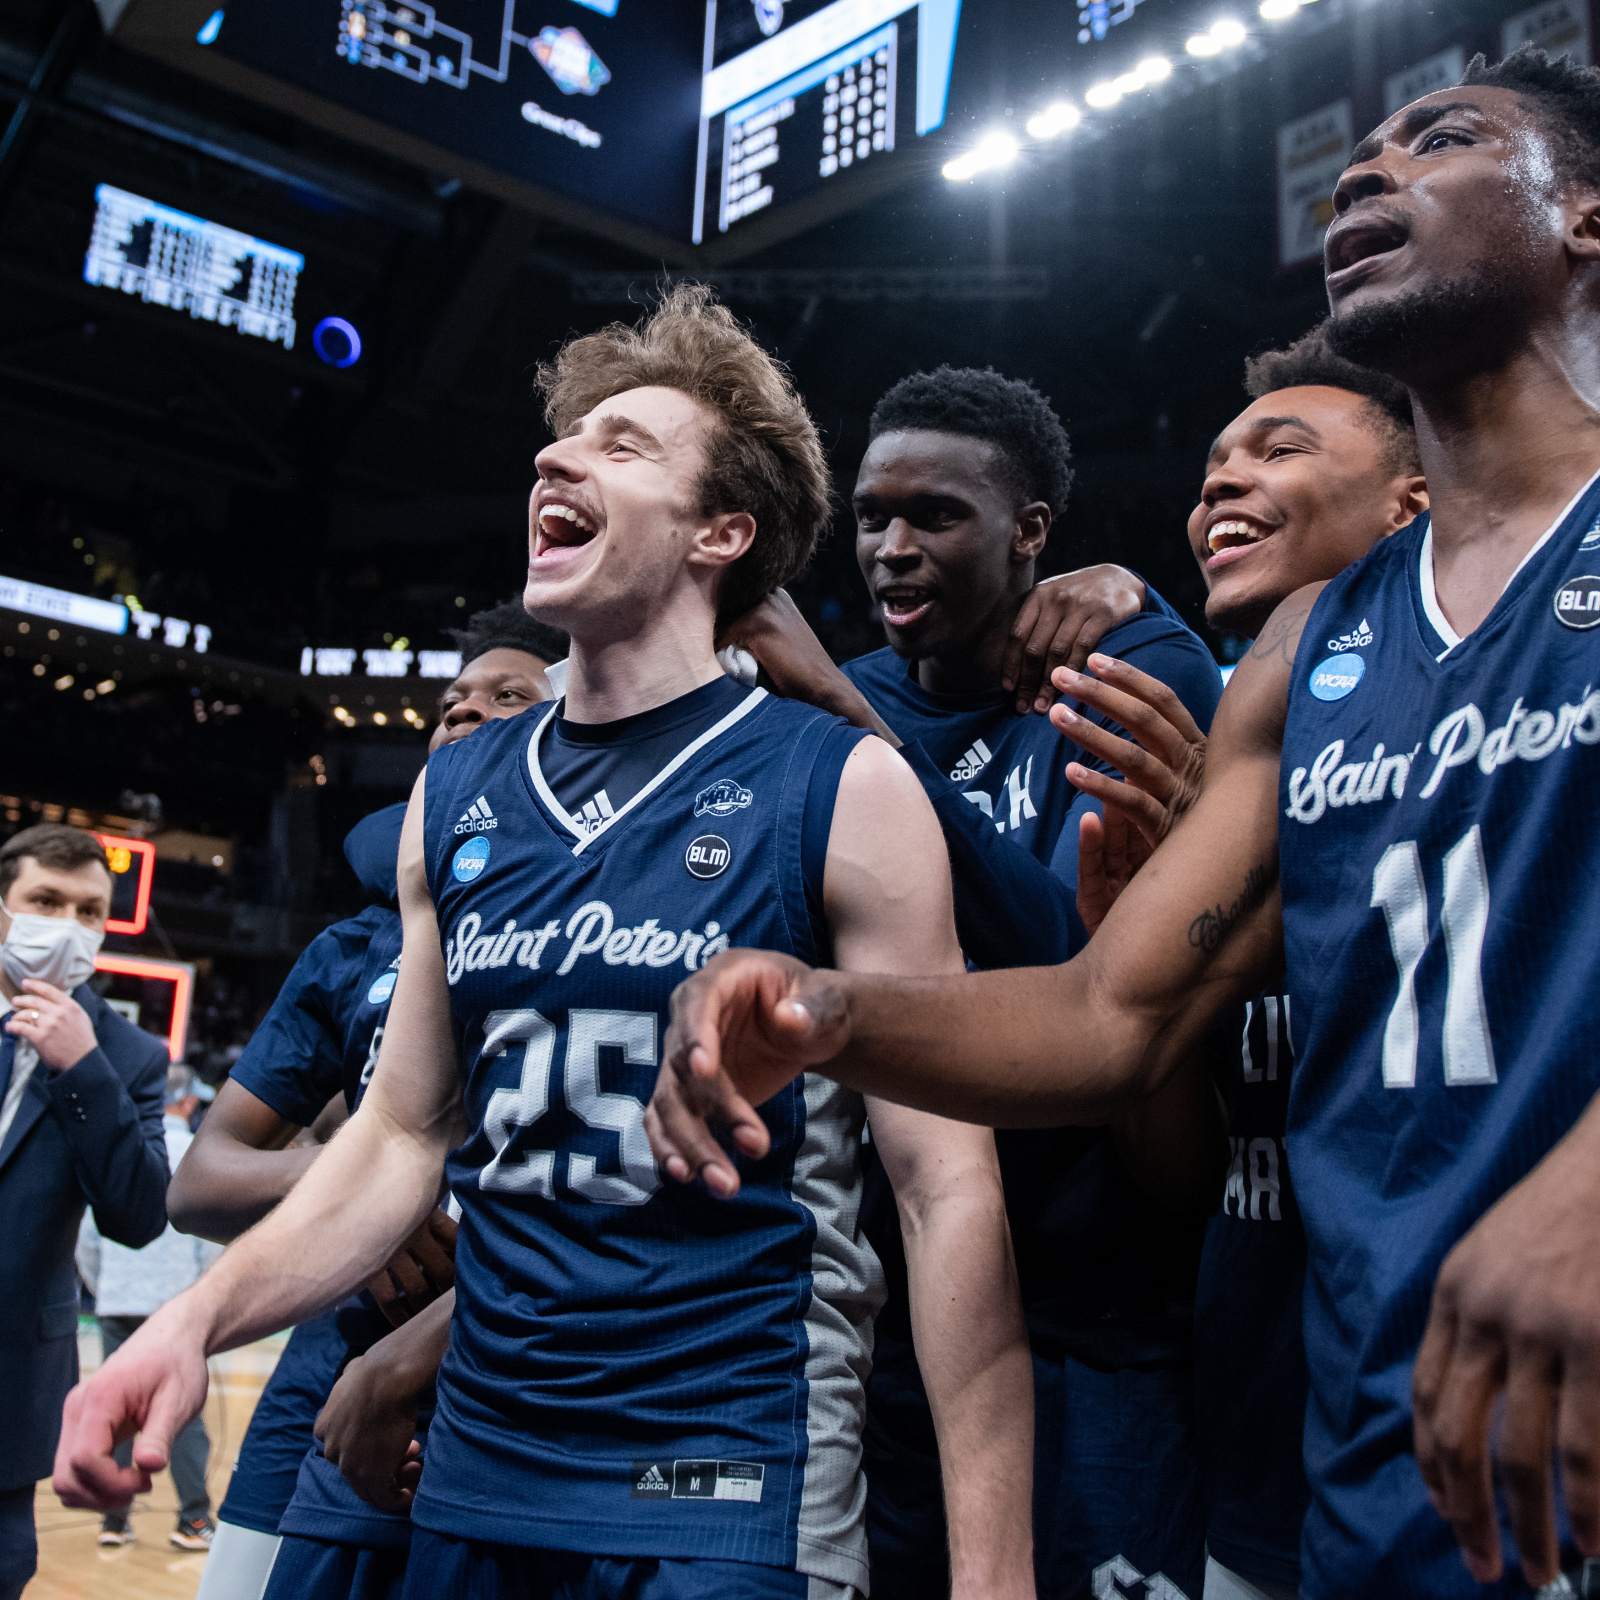 Saint Peter's Cinderella NCAA Tournament Run Unlikely to Lead to Financial  'Jackpot' | News, Scores, Highlights, Stats, and Rumors | Bleacher Report